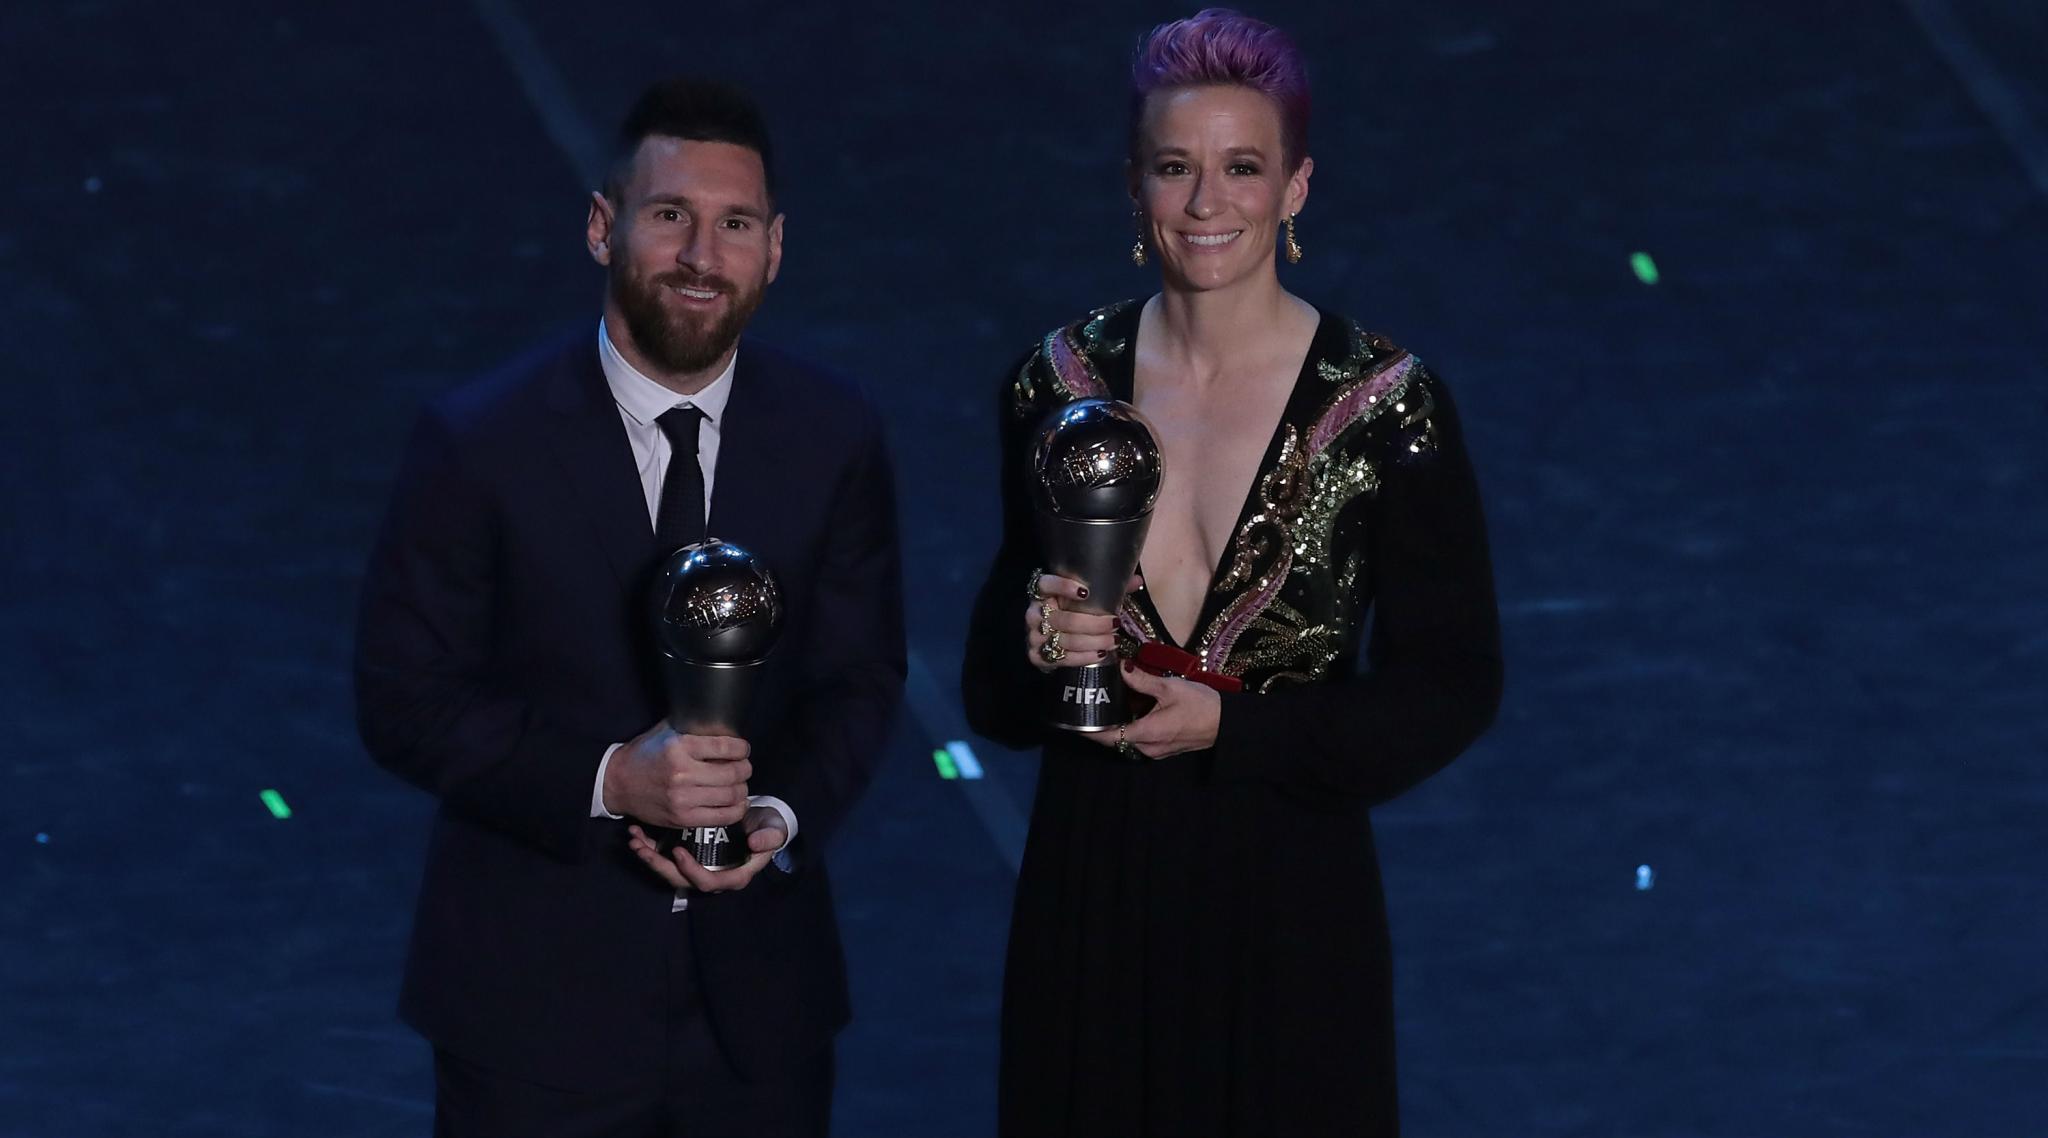 Lionel Messi Wins FIFA Men's Player of the Year Award as Cristiano Ronaldo Skips ...